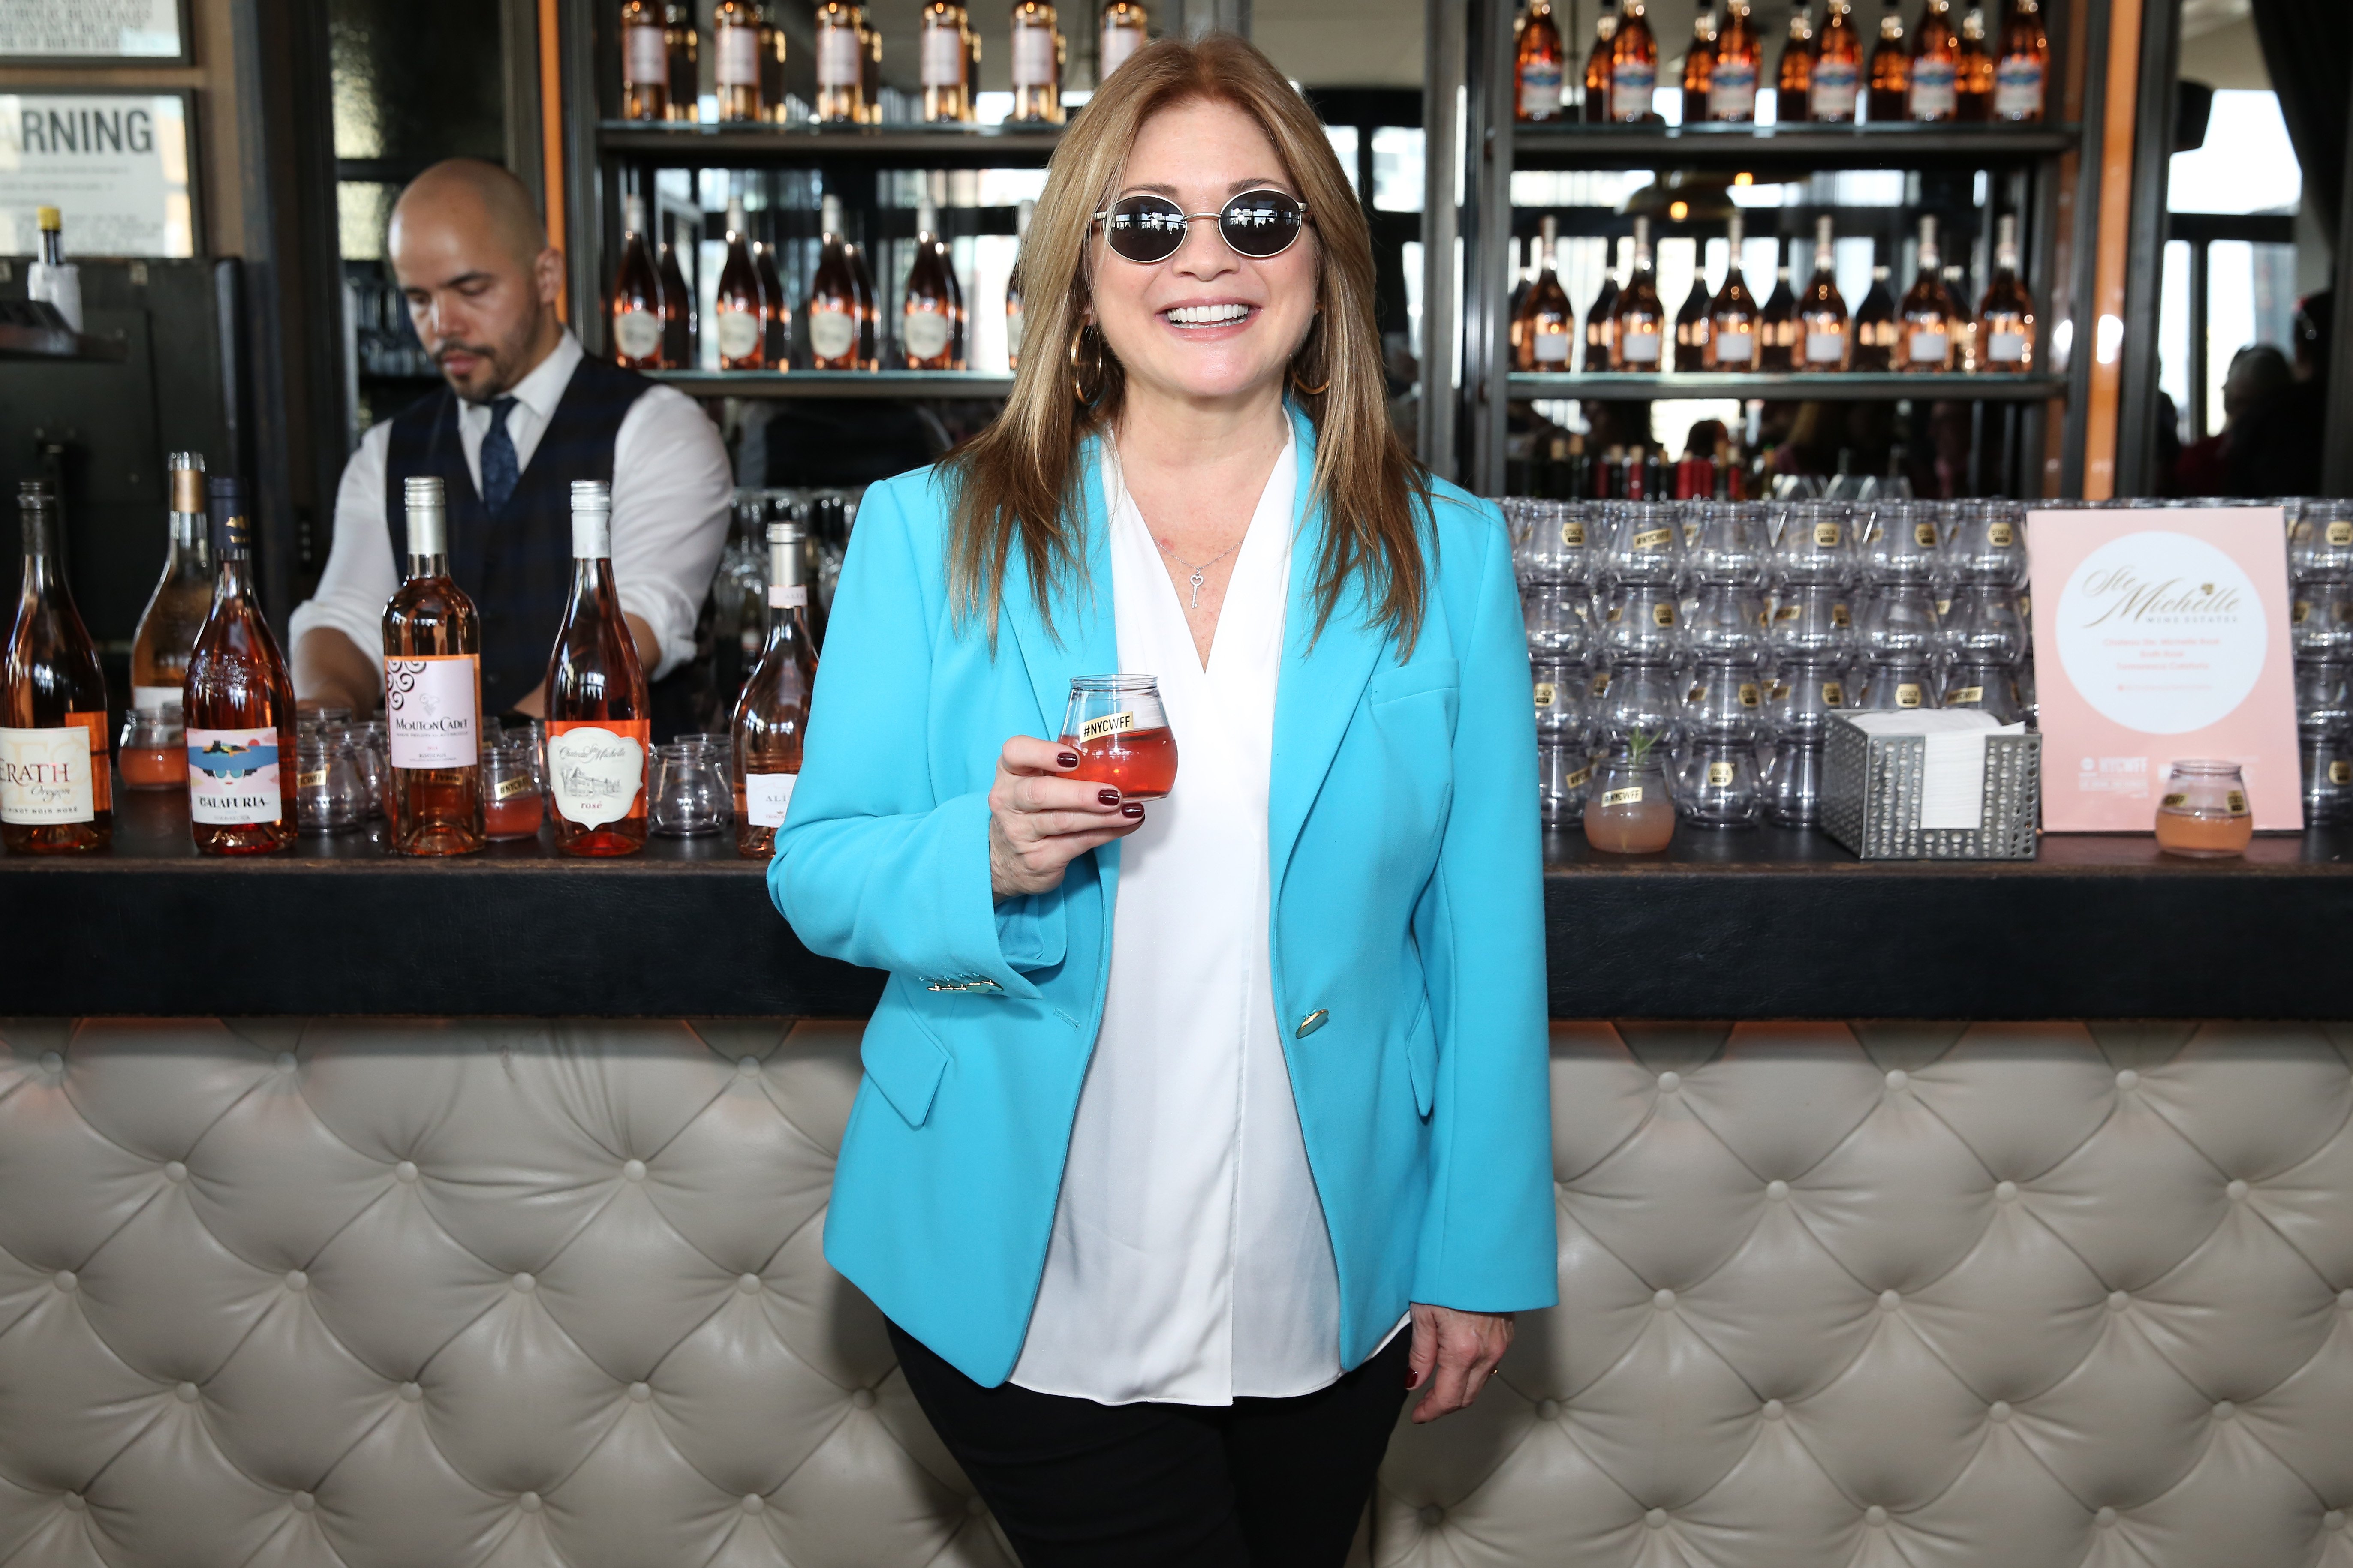 Valerie Bertinelli attends the Food Network & Cooking Channel New York City Wine & Food Festival presented by Capital One - Rooftop Rosé hosted by Valerie Bertinelli, at The Skylark on October 13, 2019 in New York City. | Source: Getty Images